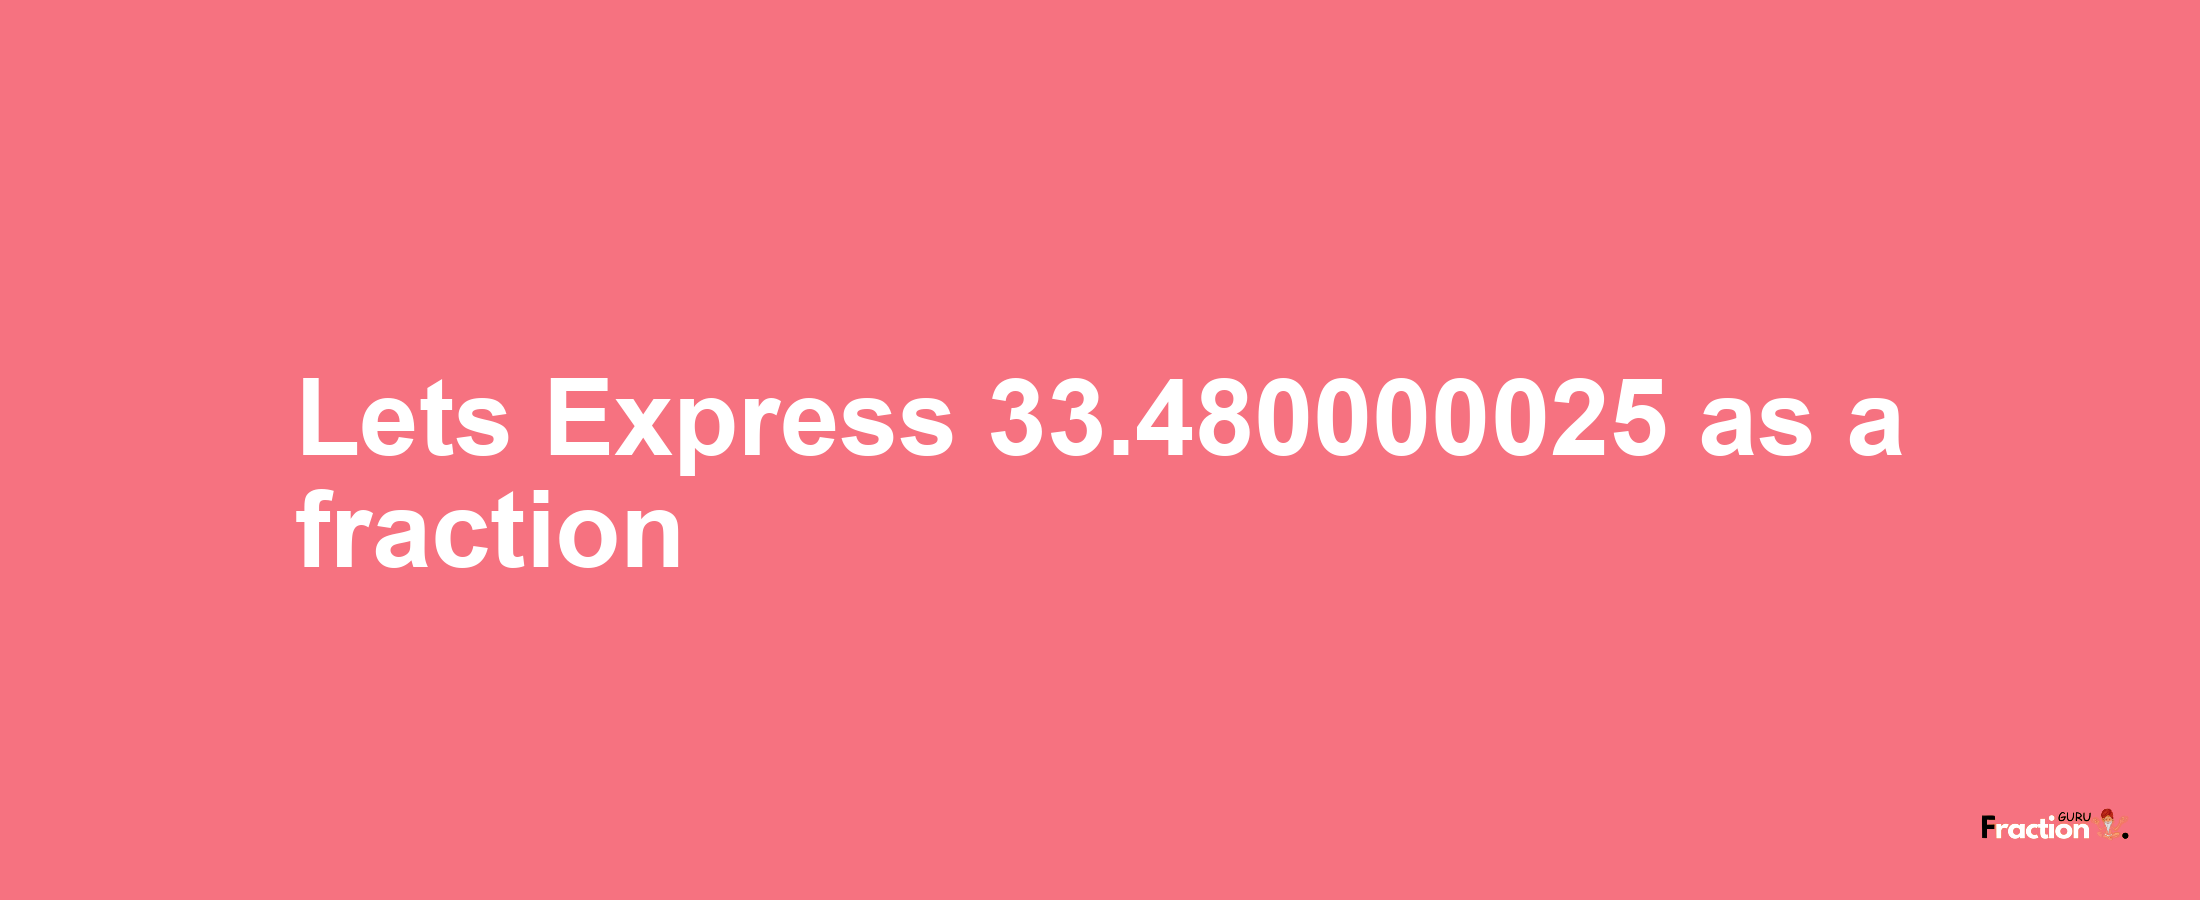 Lets Express 33.480000025 as afraction